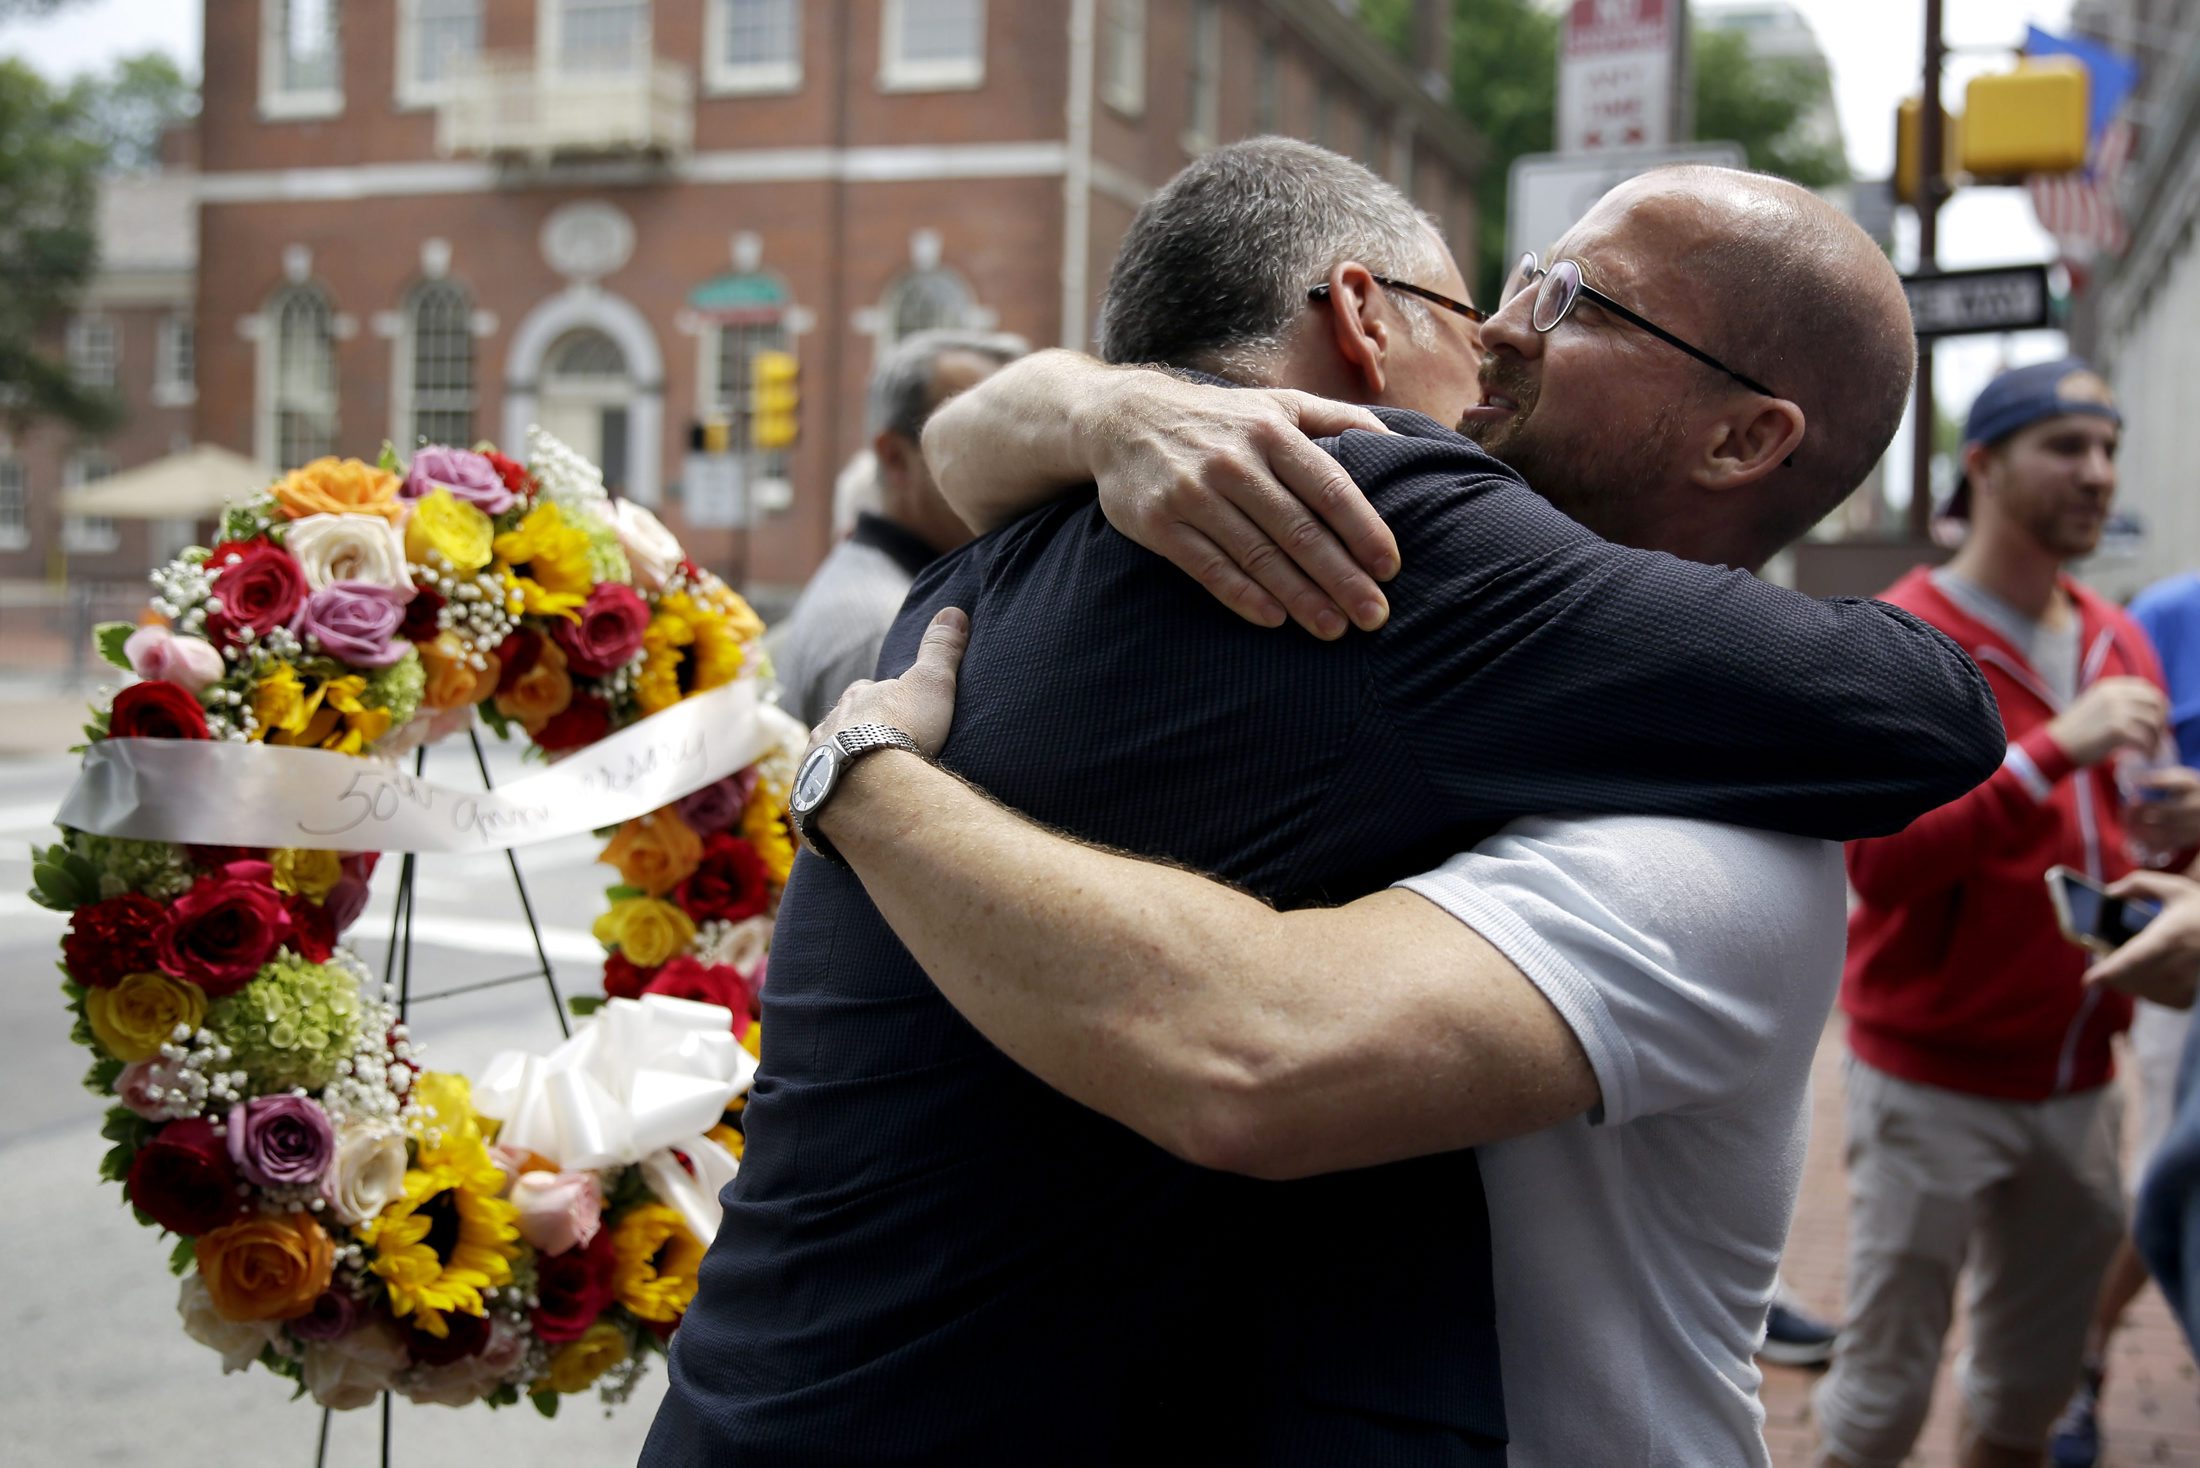 Jim Obergefell, left, the man behind the landmark Supreme Court gay marriage ruling, hugs Jeff Sigler, of New York, after laying a wreath at the Gay Pioneers historical marker across from Independence Hall and the Liberty Bell Center, Thursday, July 2, 2015, in Philadelphia. Some 40 activists picketed for gay rights on July Fourth in 1965 at the site. (AP Photo/Matt Slocum)